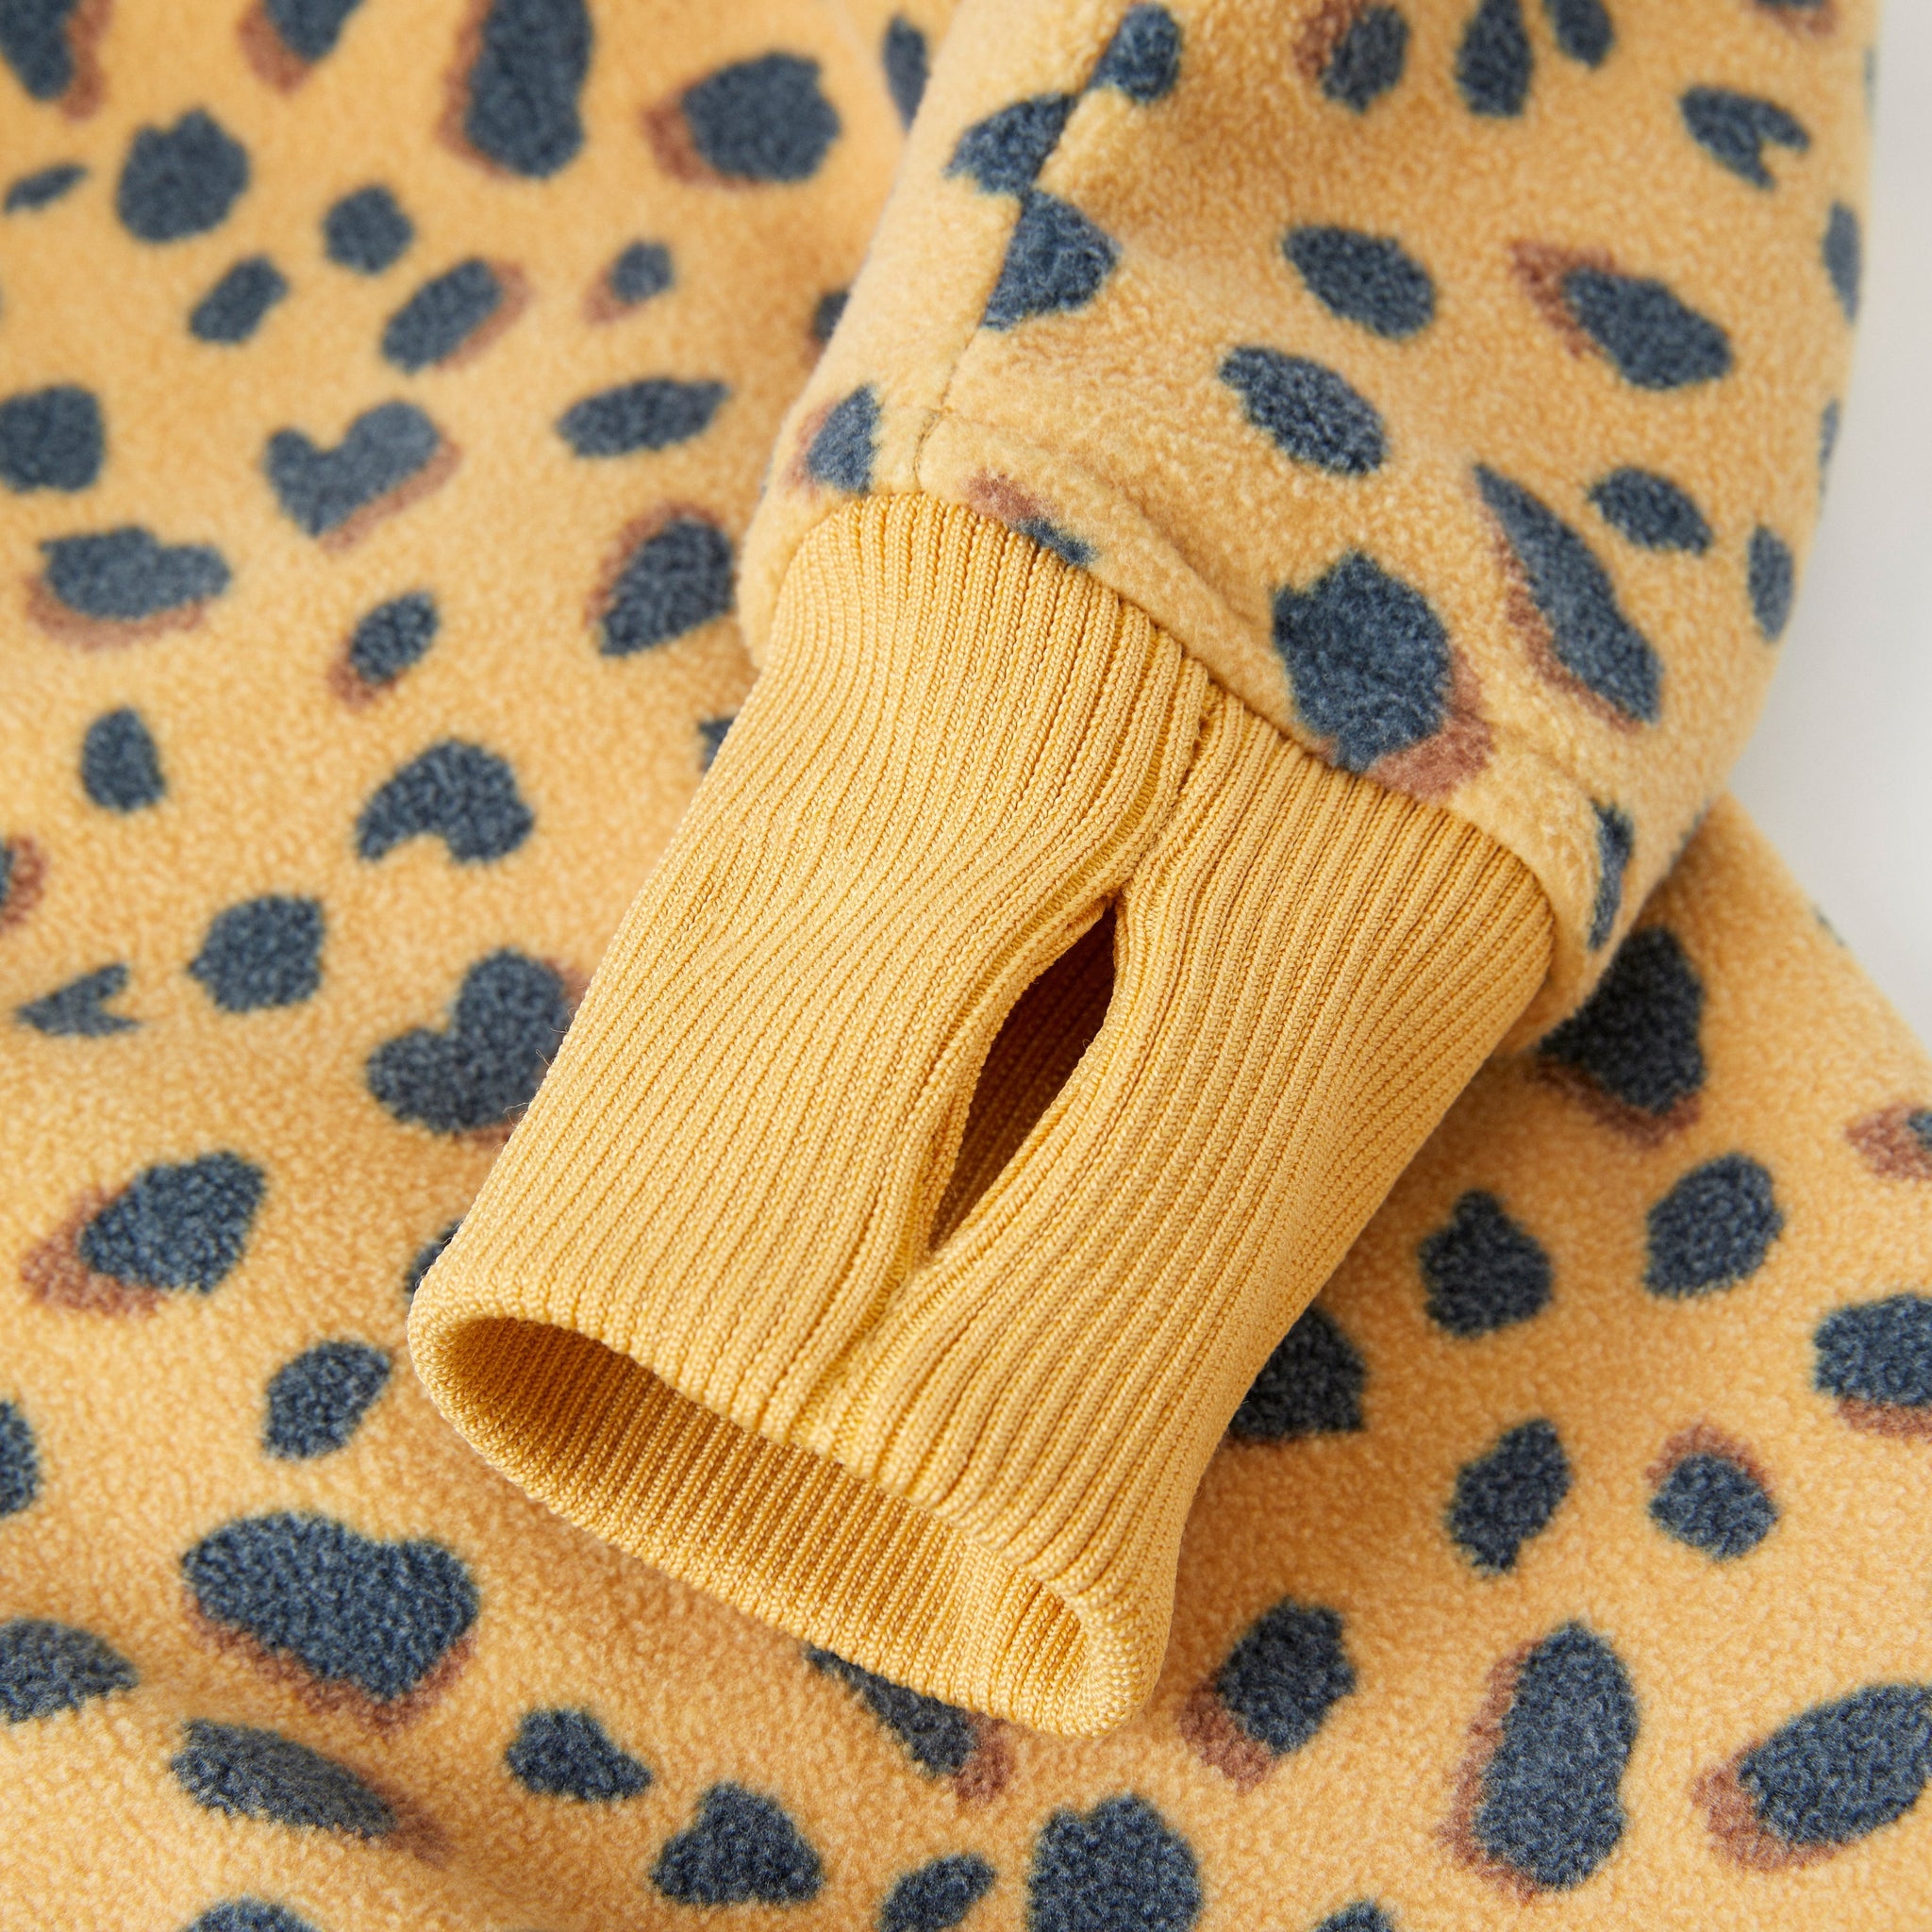 Leopard Print Kids Fleece Jacket from the Polarn O. Pyret kidswear collection. Ethically produced outerwear.